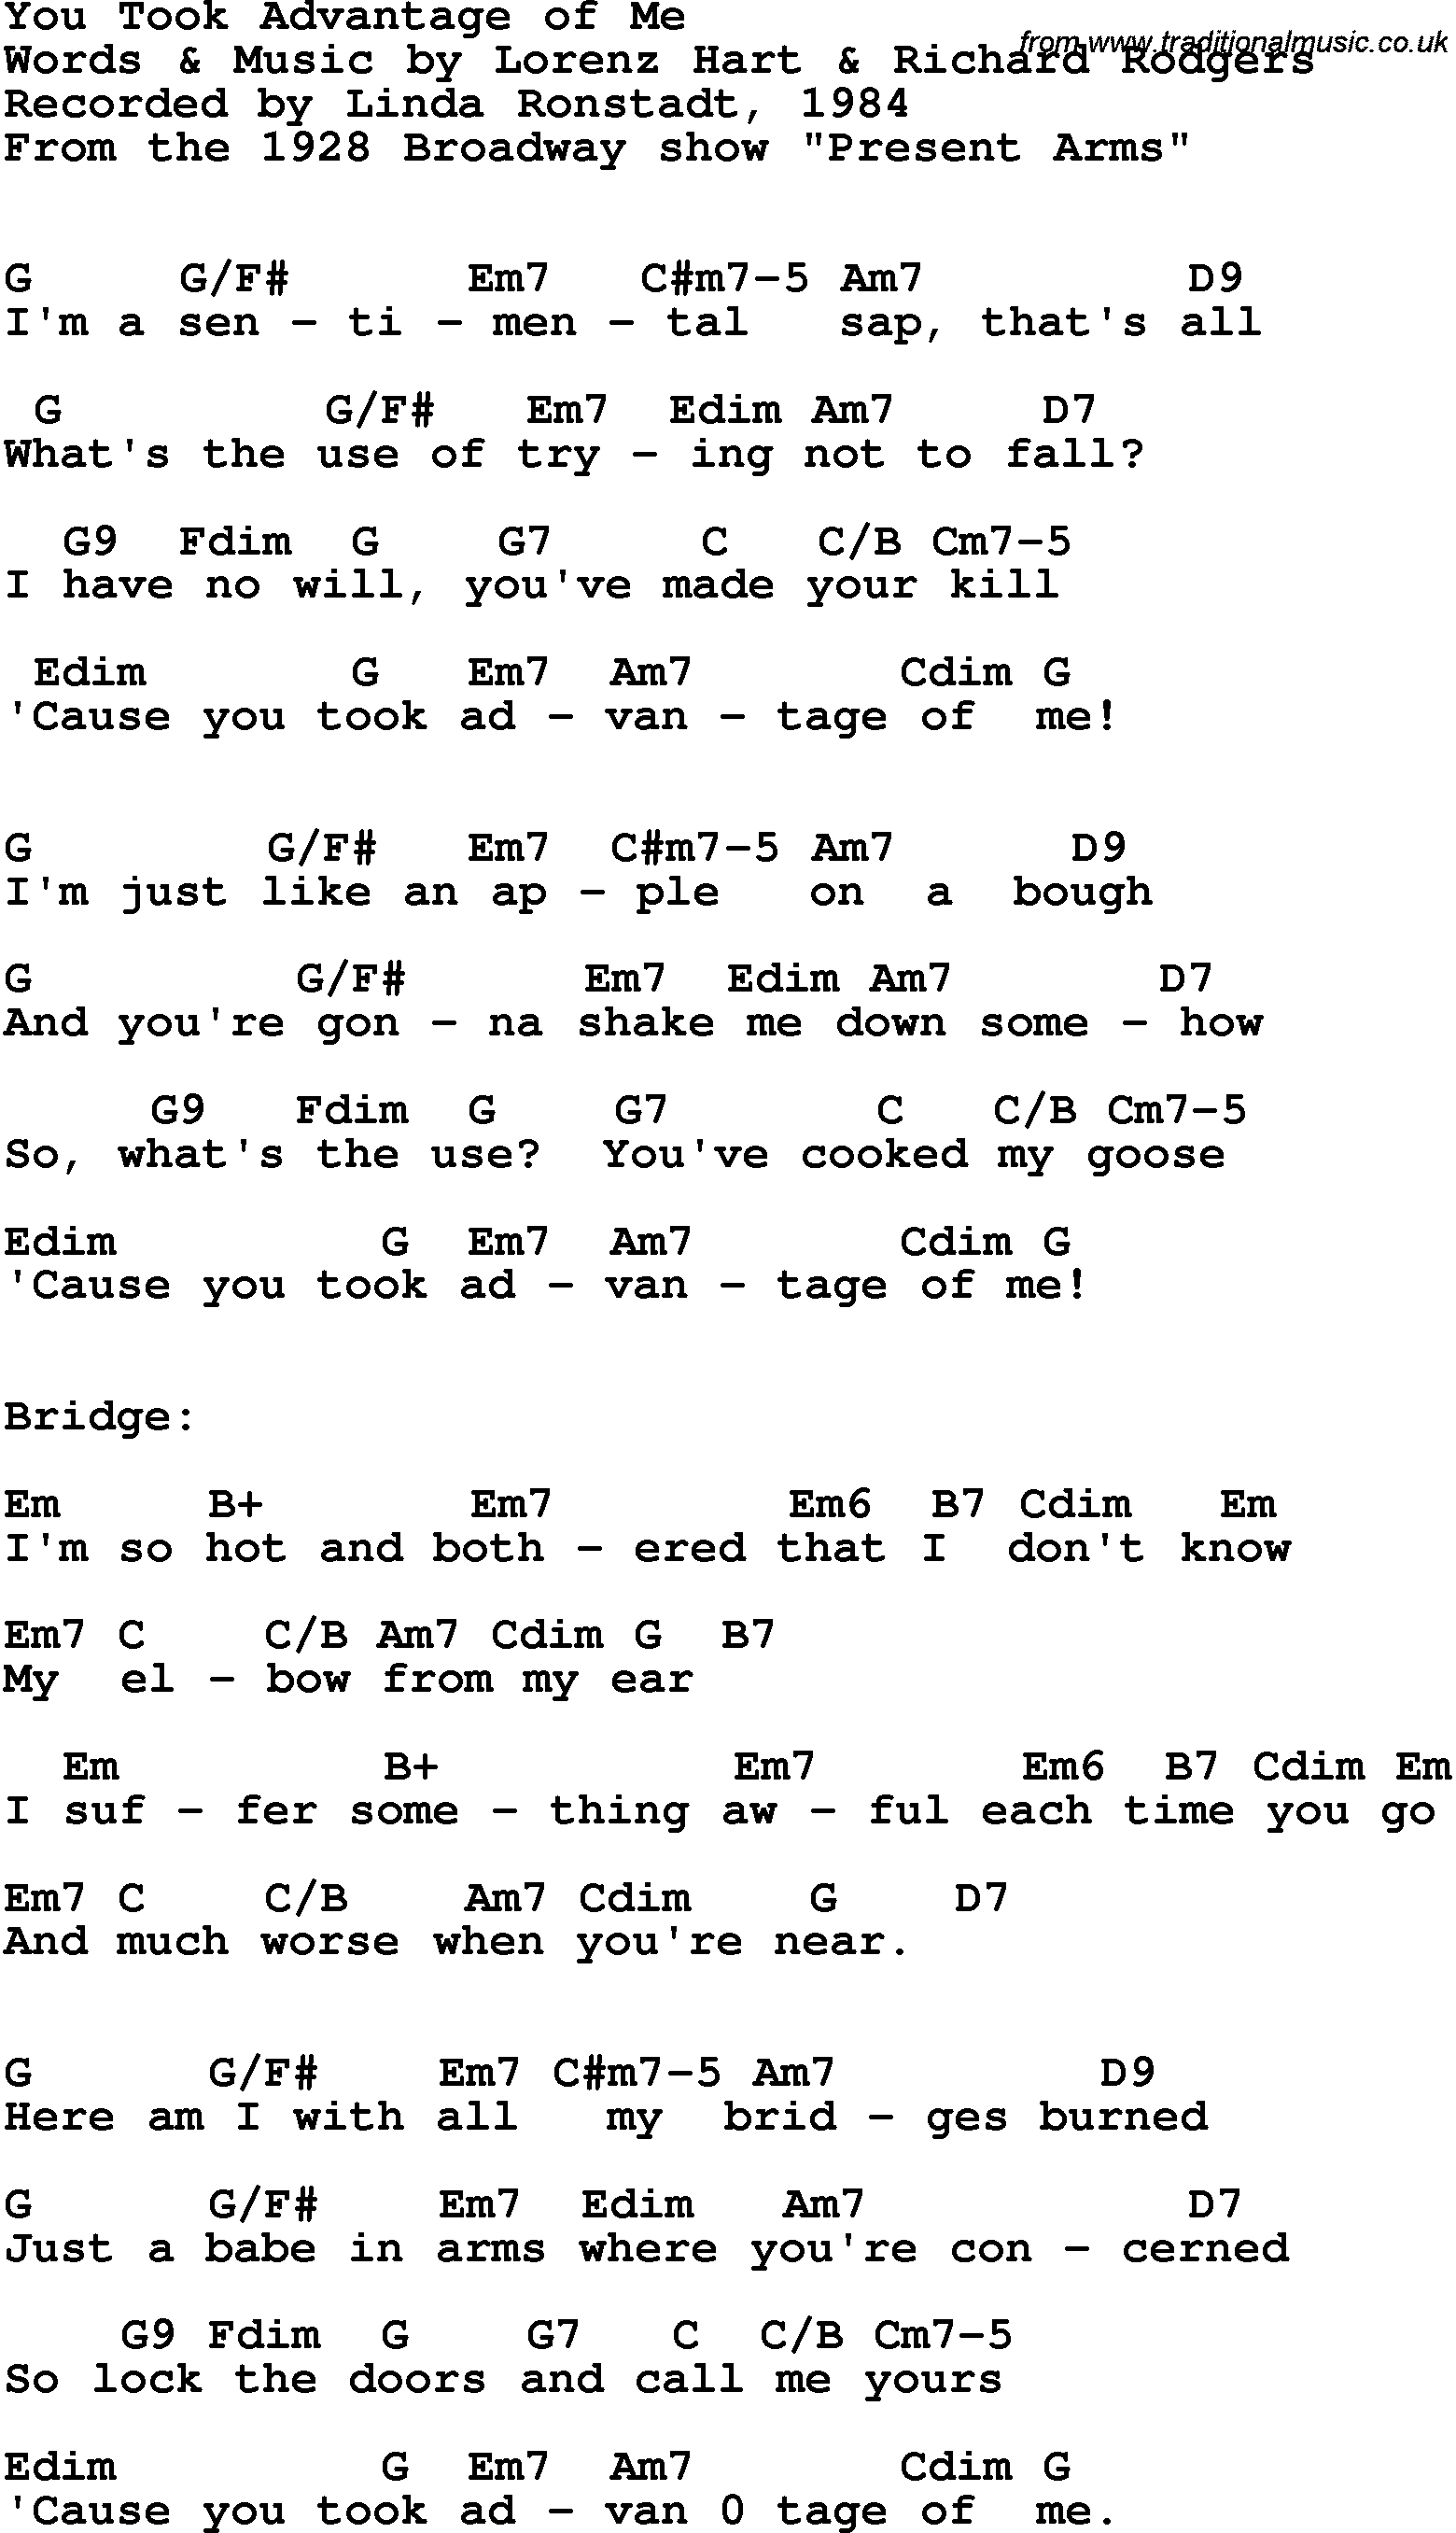 Song Lyrics with guitar chords for You Took Advantage Of Me - Linda Ronstadt, 1985